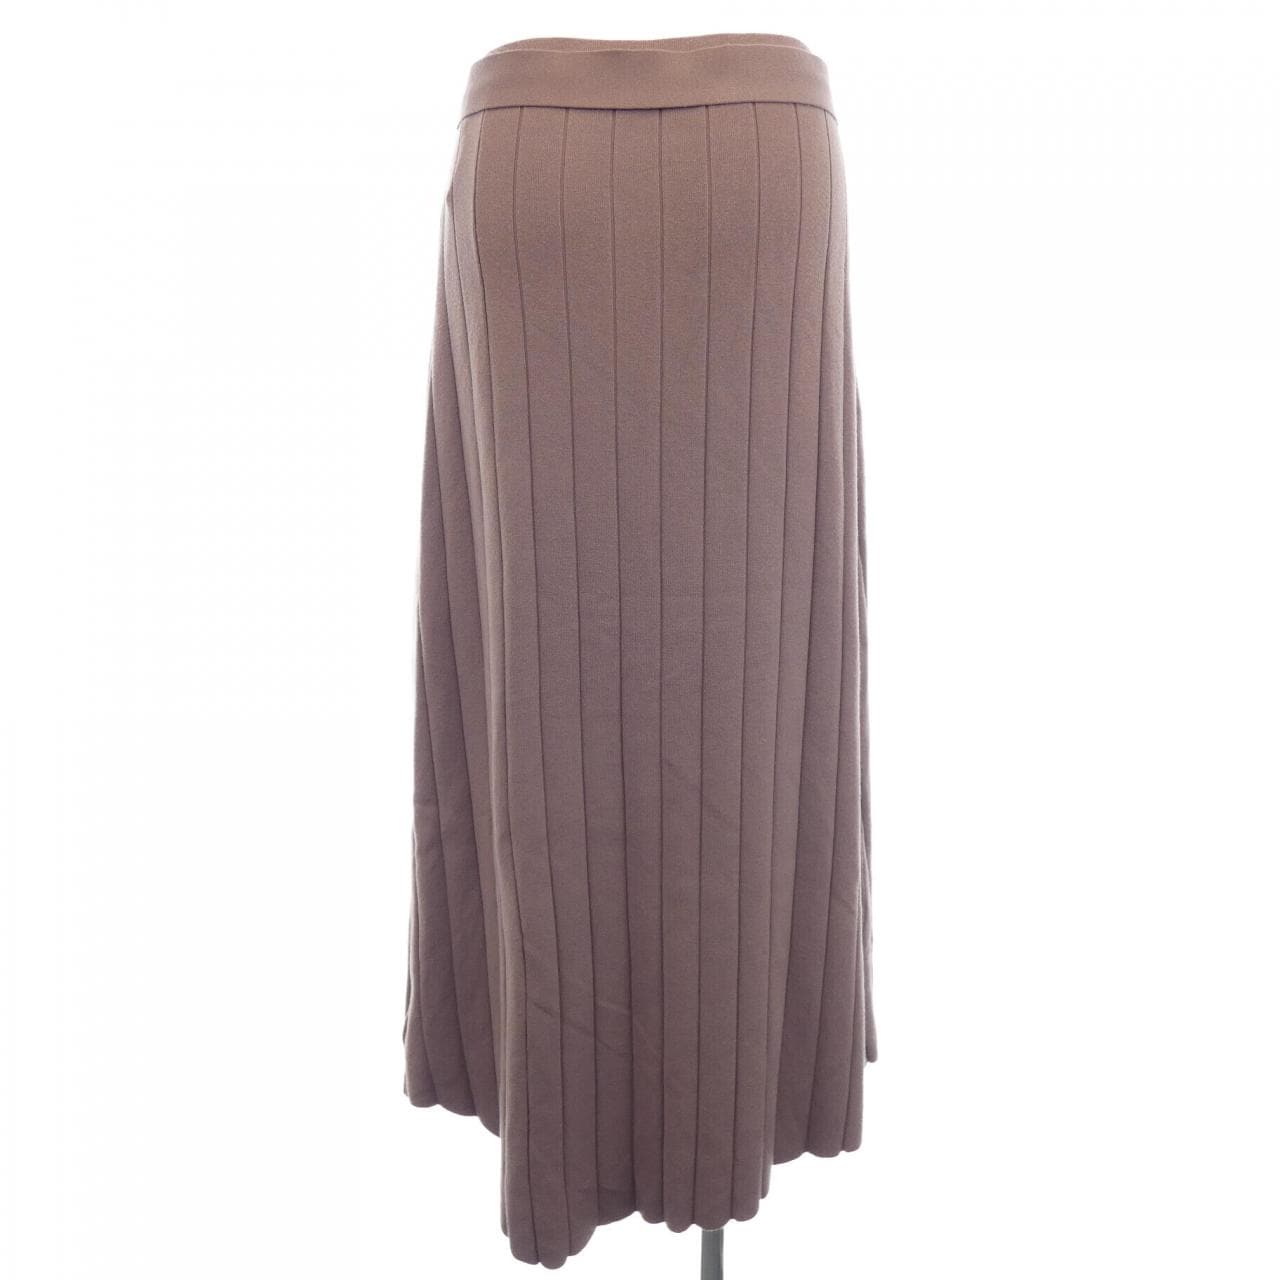 Theory luxe Skirt